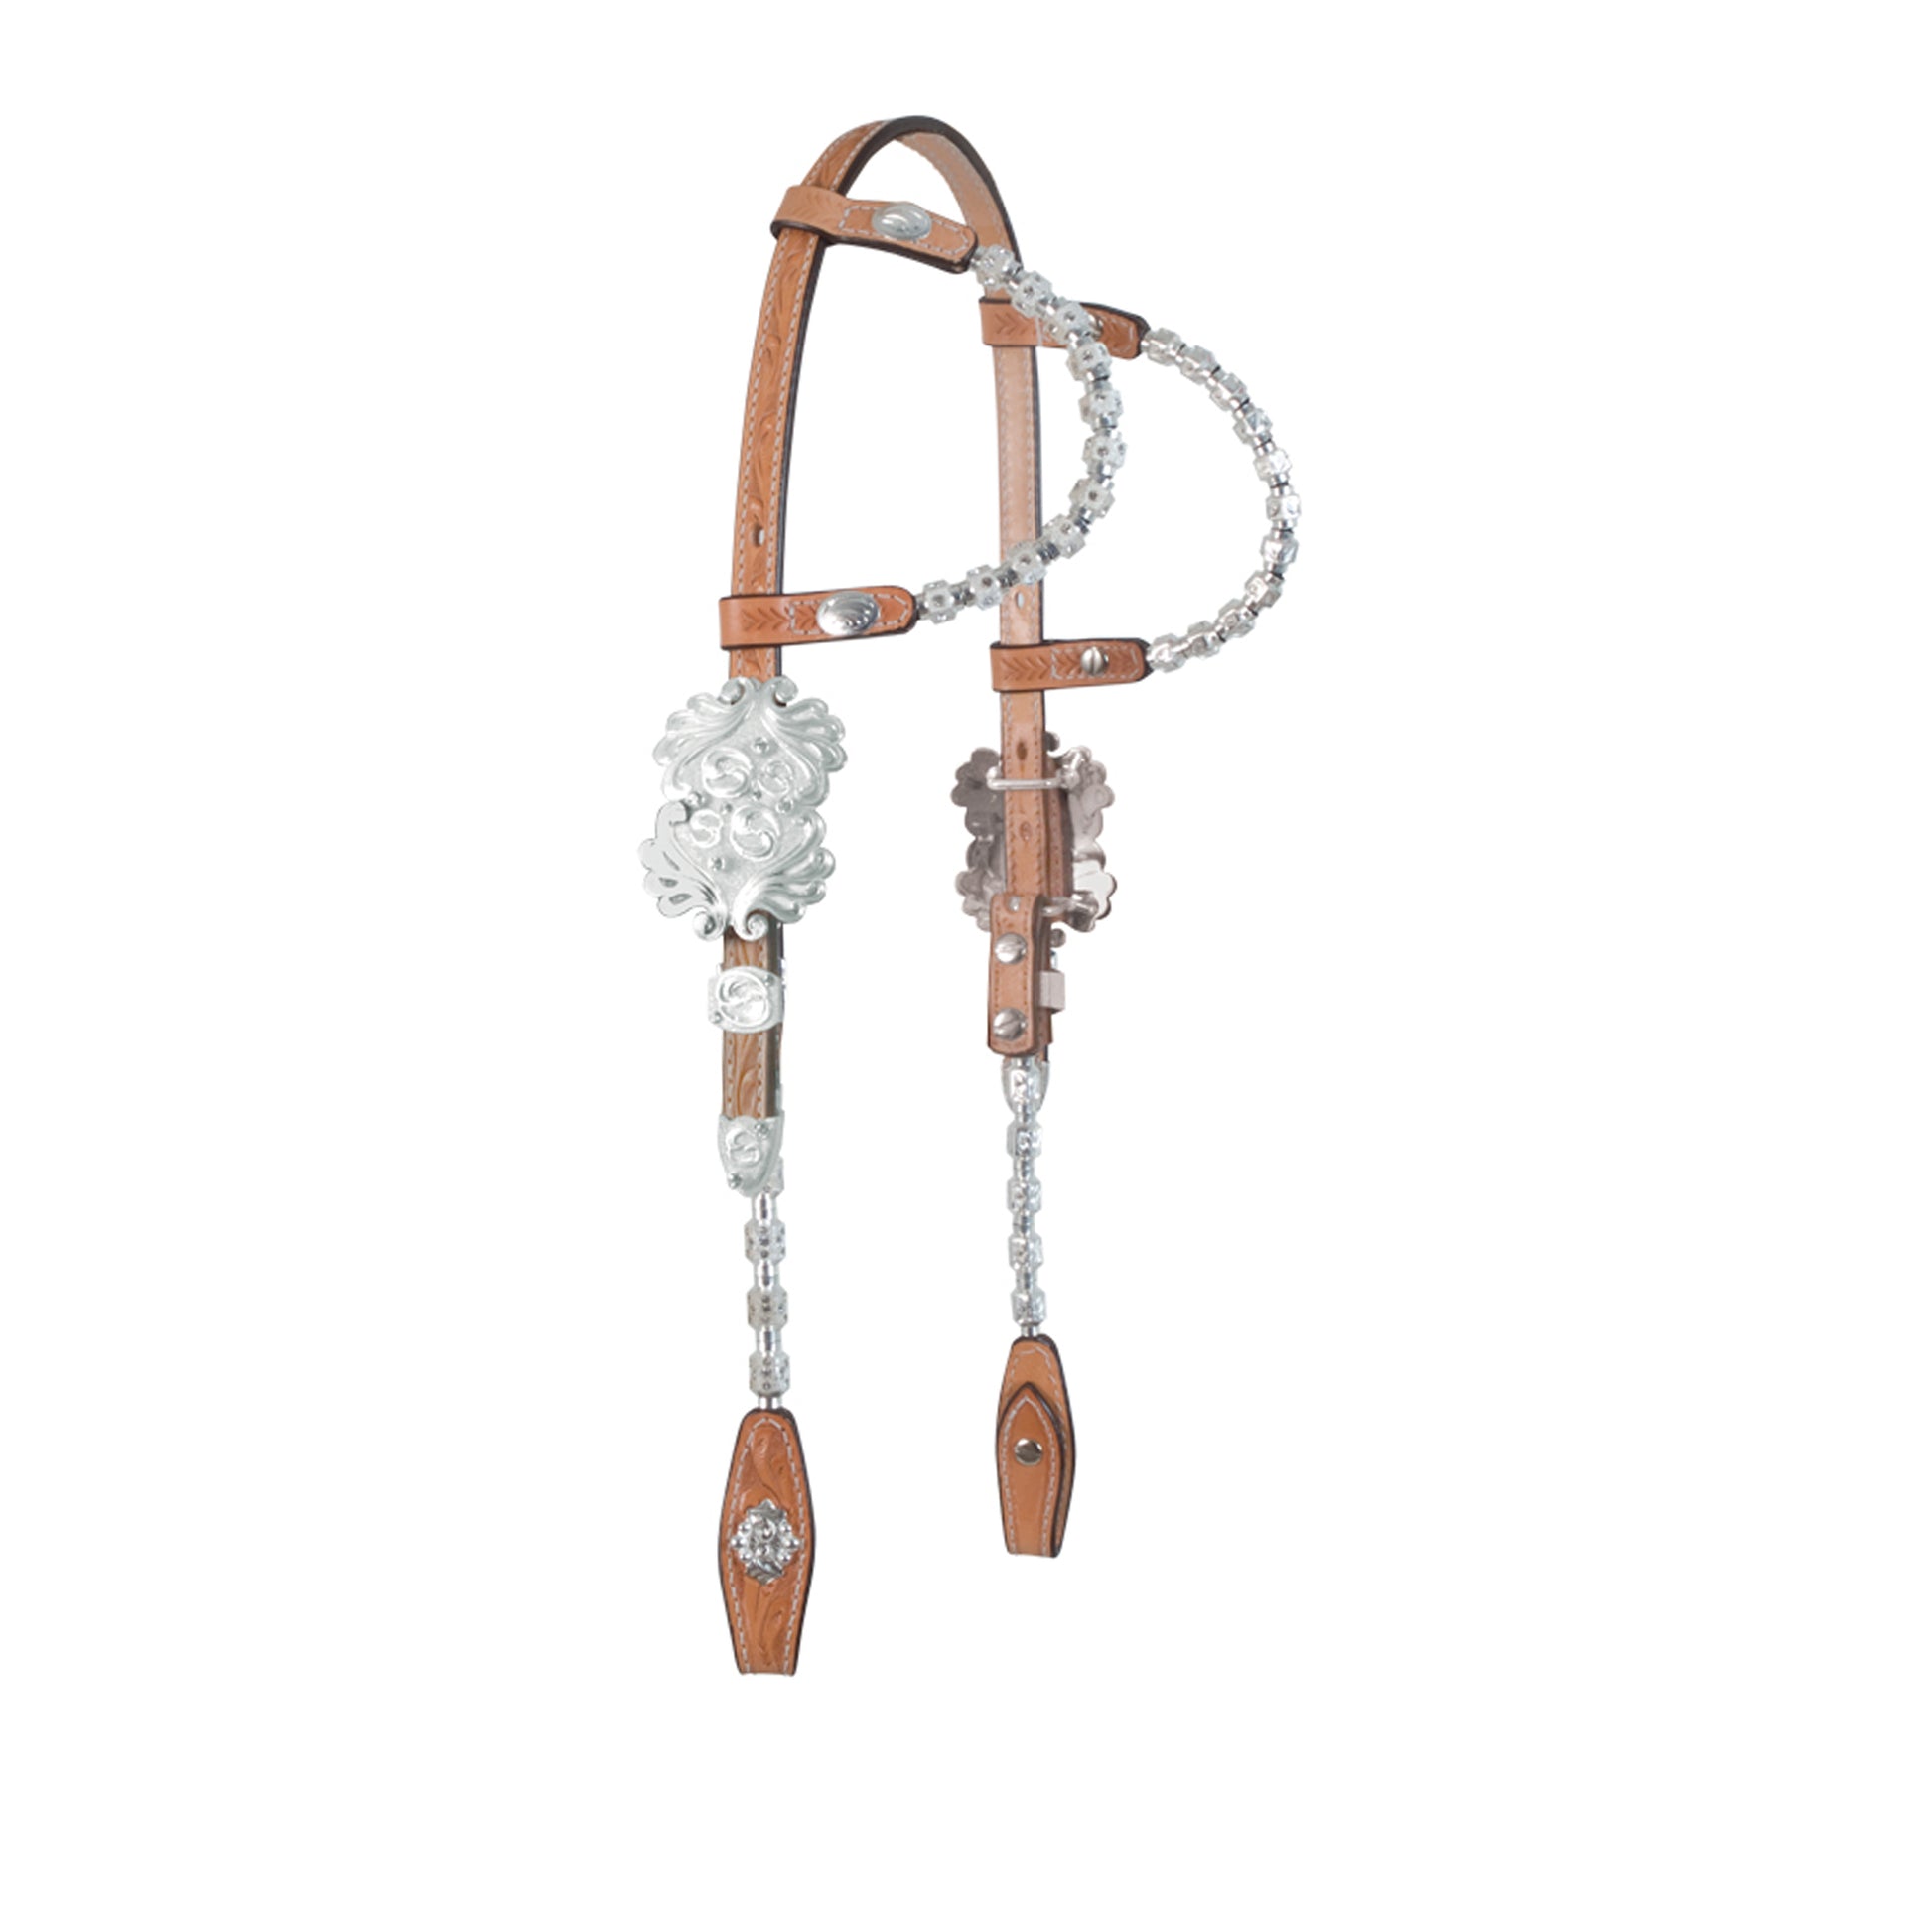 5/8" Round double silver ear headstall golden leather floral tooled with silver ice ferrules, stones, and silver hardware.